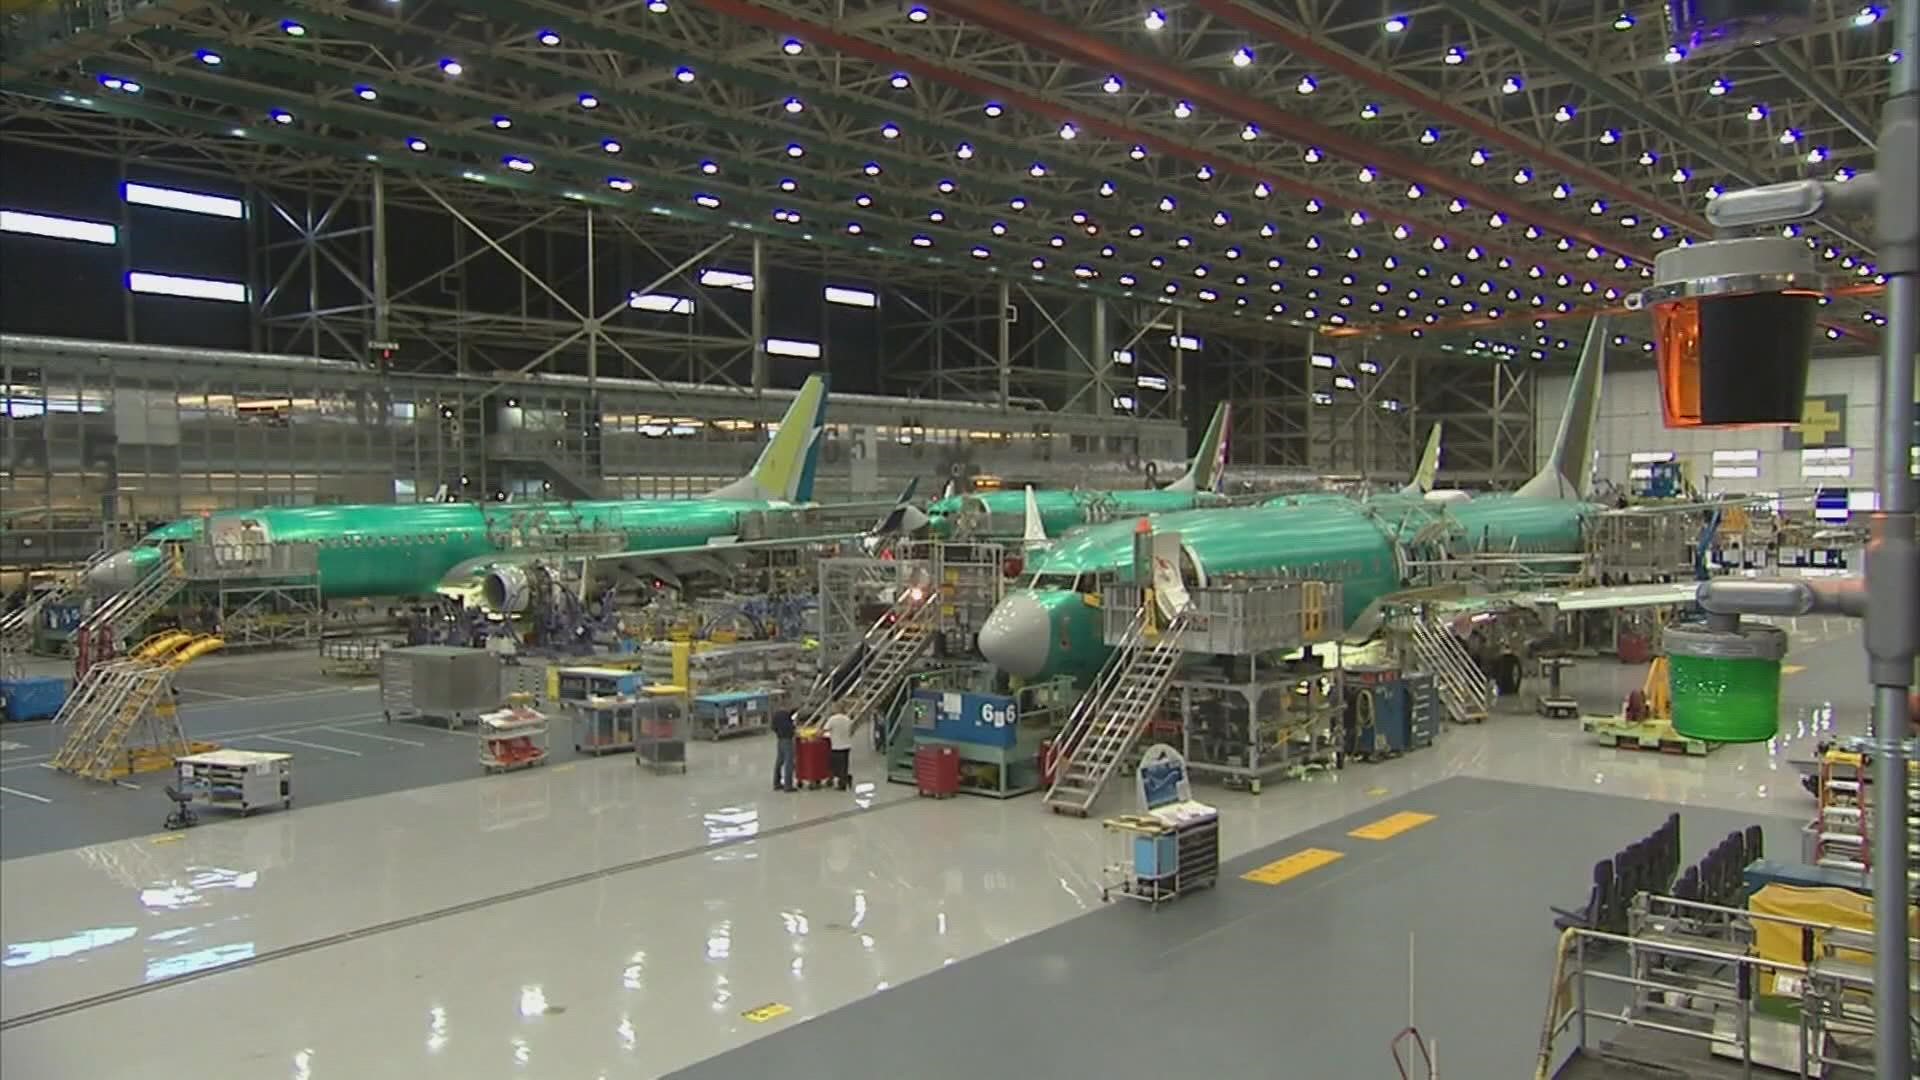 A new report outlines how Boeing will rework its safety culture in the wake of the deadly 737 MAX crashes.